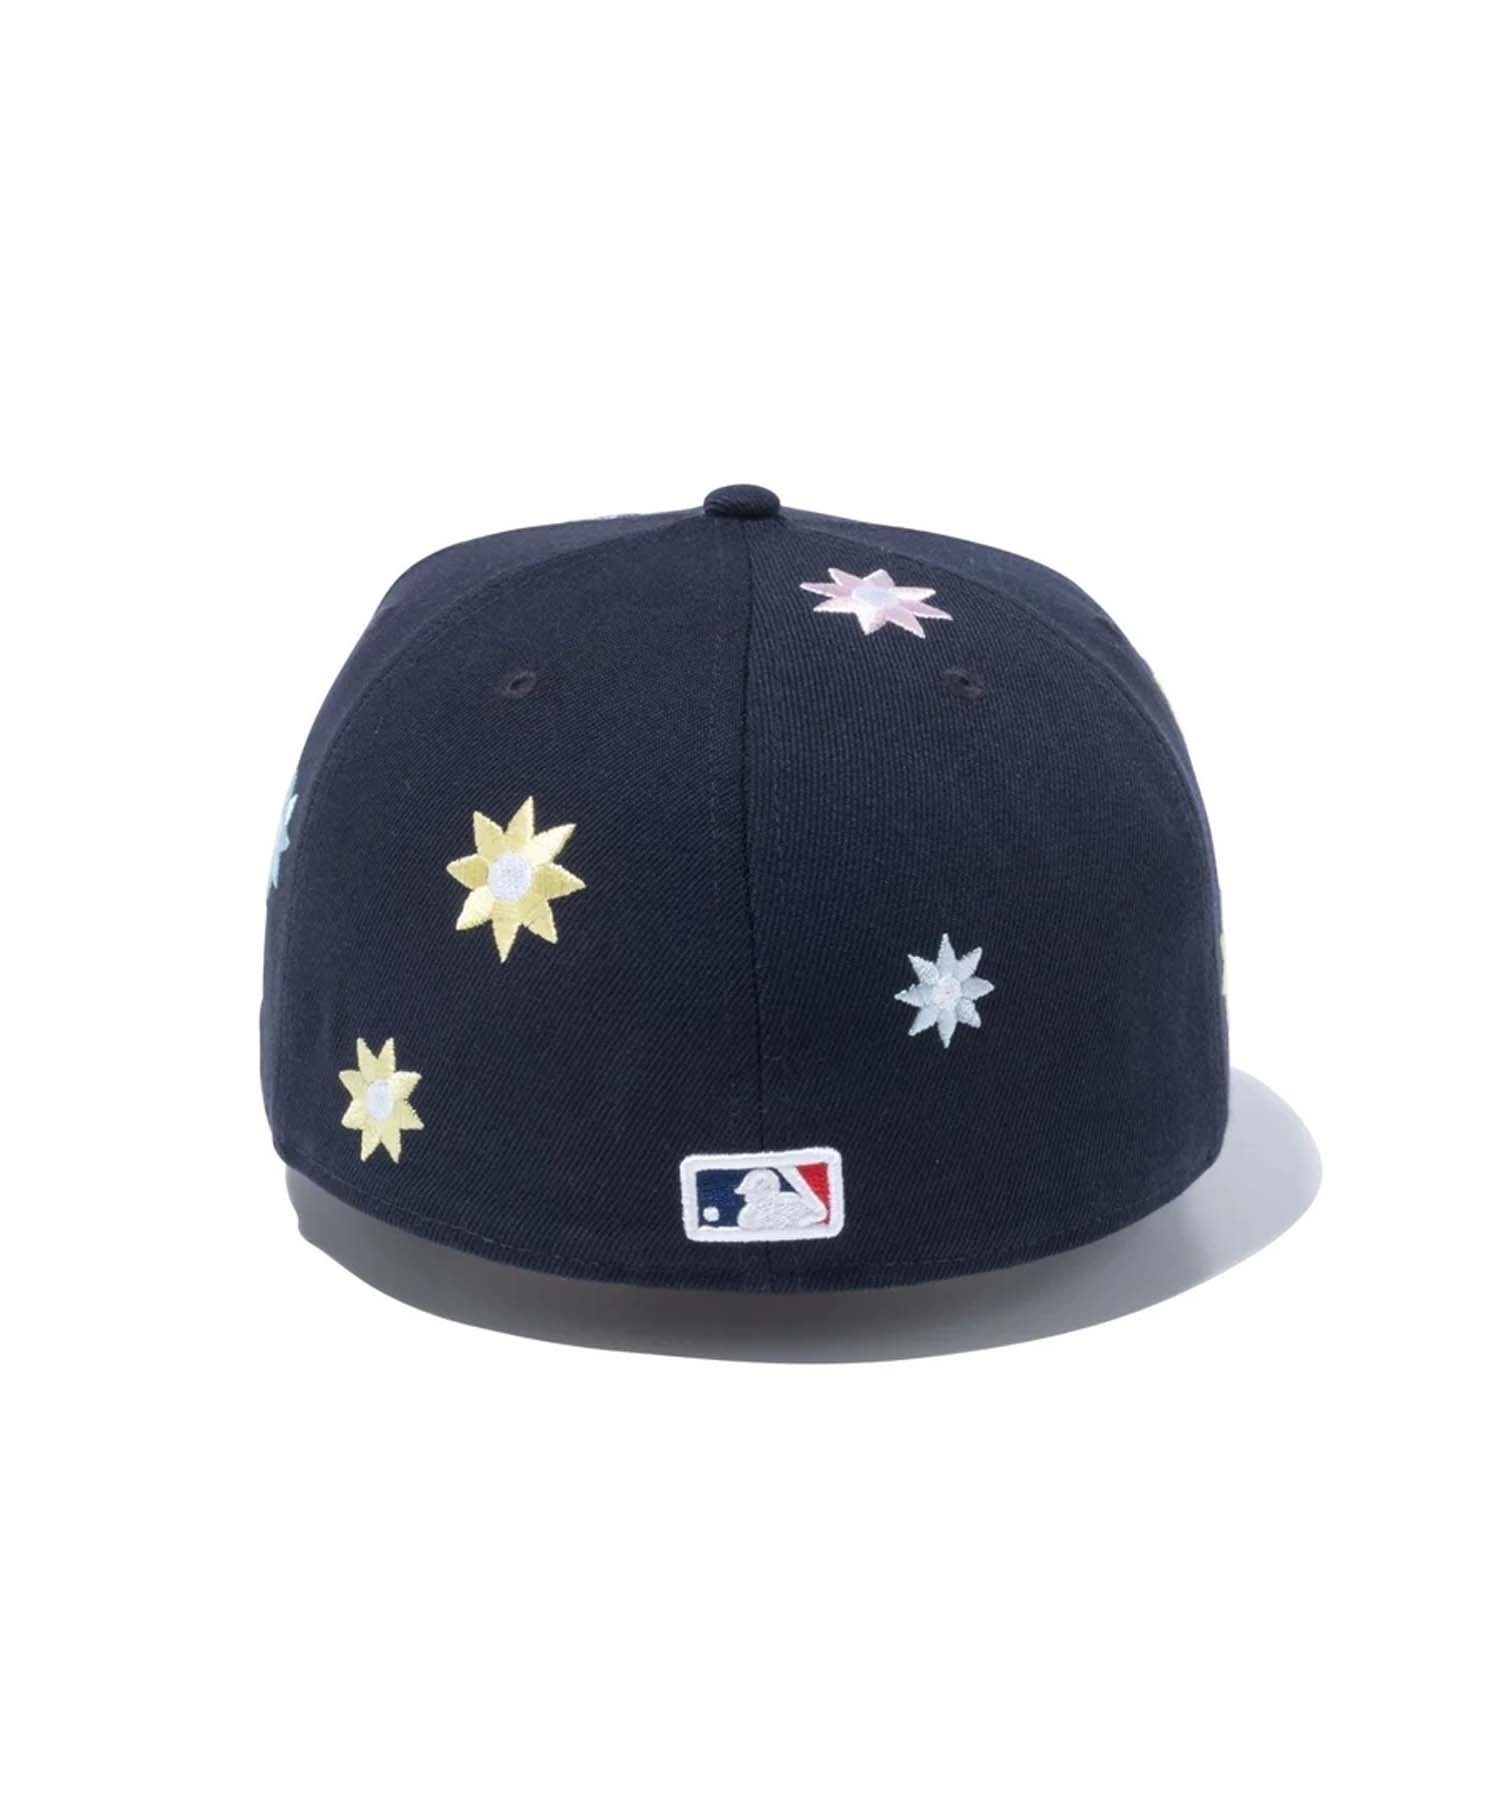 NEW ERA/ニューエラ キャップ 59FIFTY MLB Flower Embroidery ニューヨーク・ヤンキース 13751140(NVY-714)